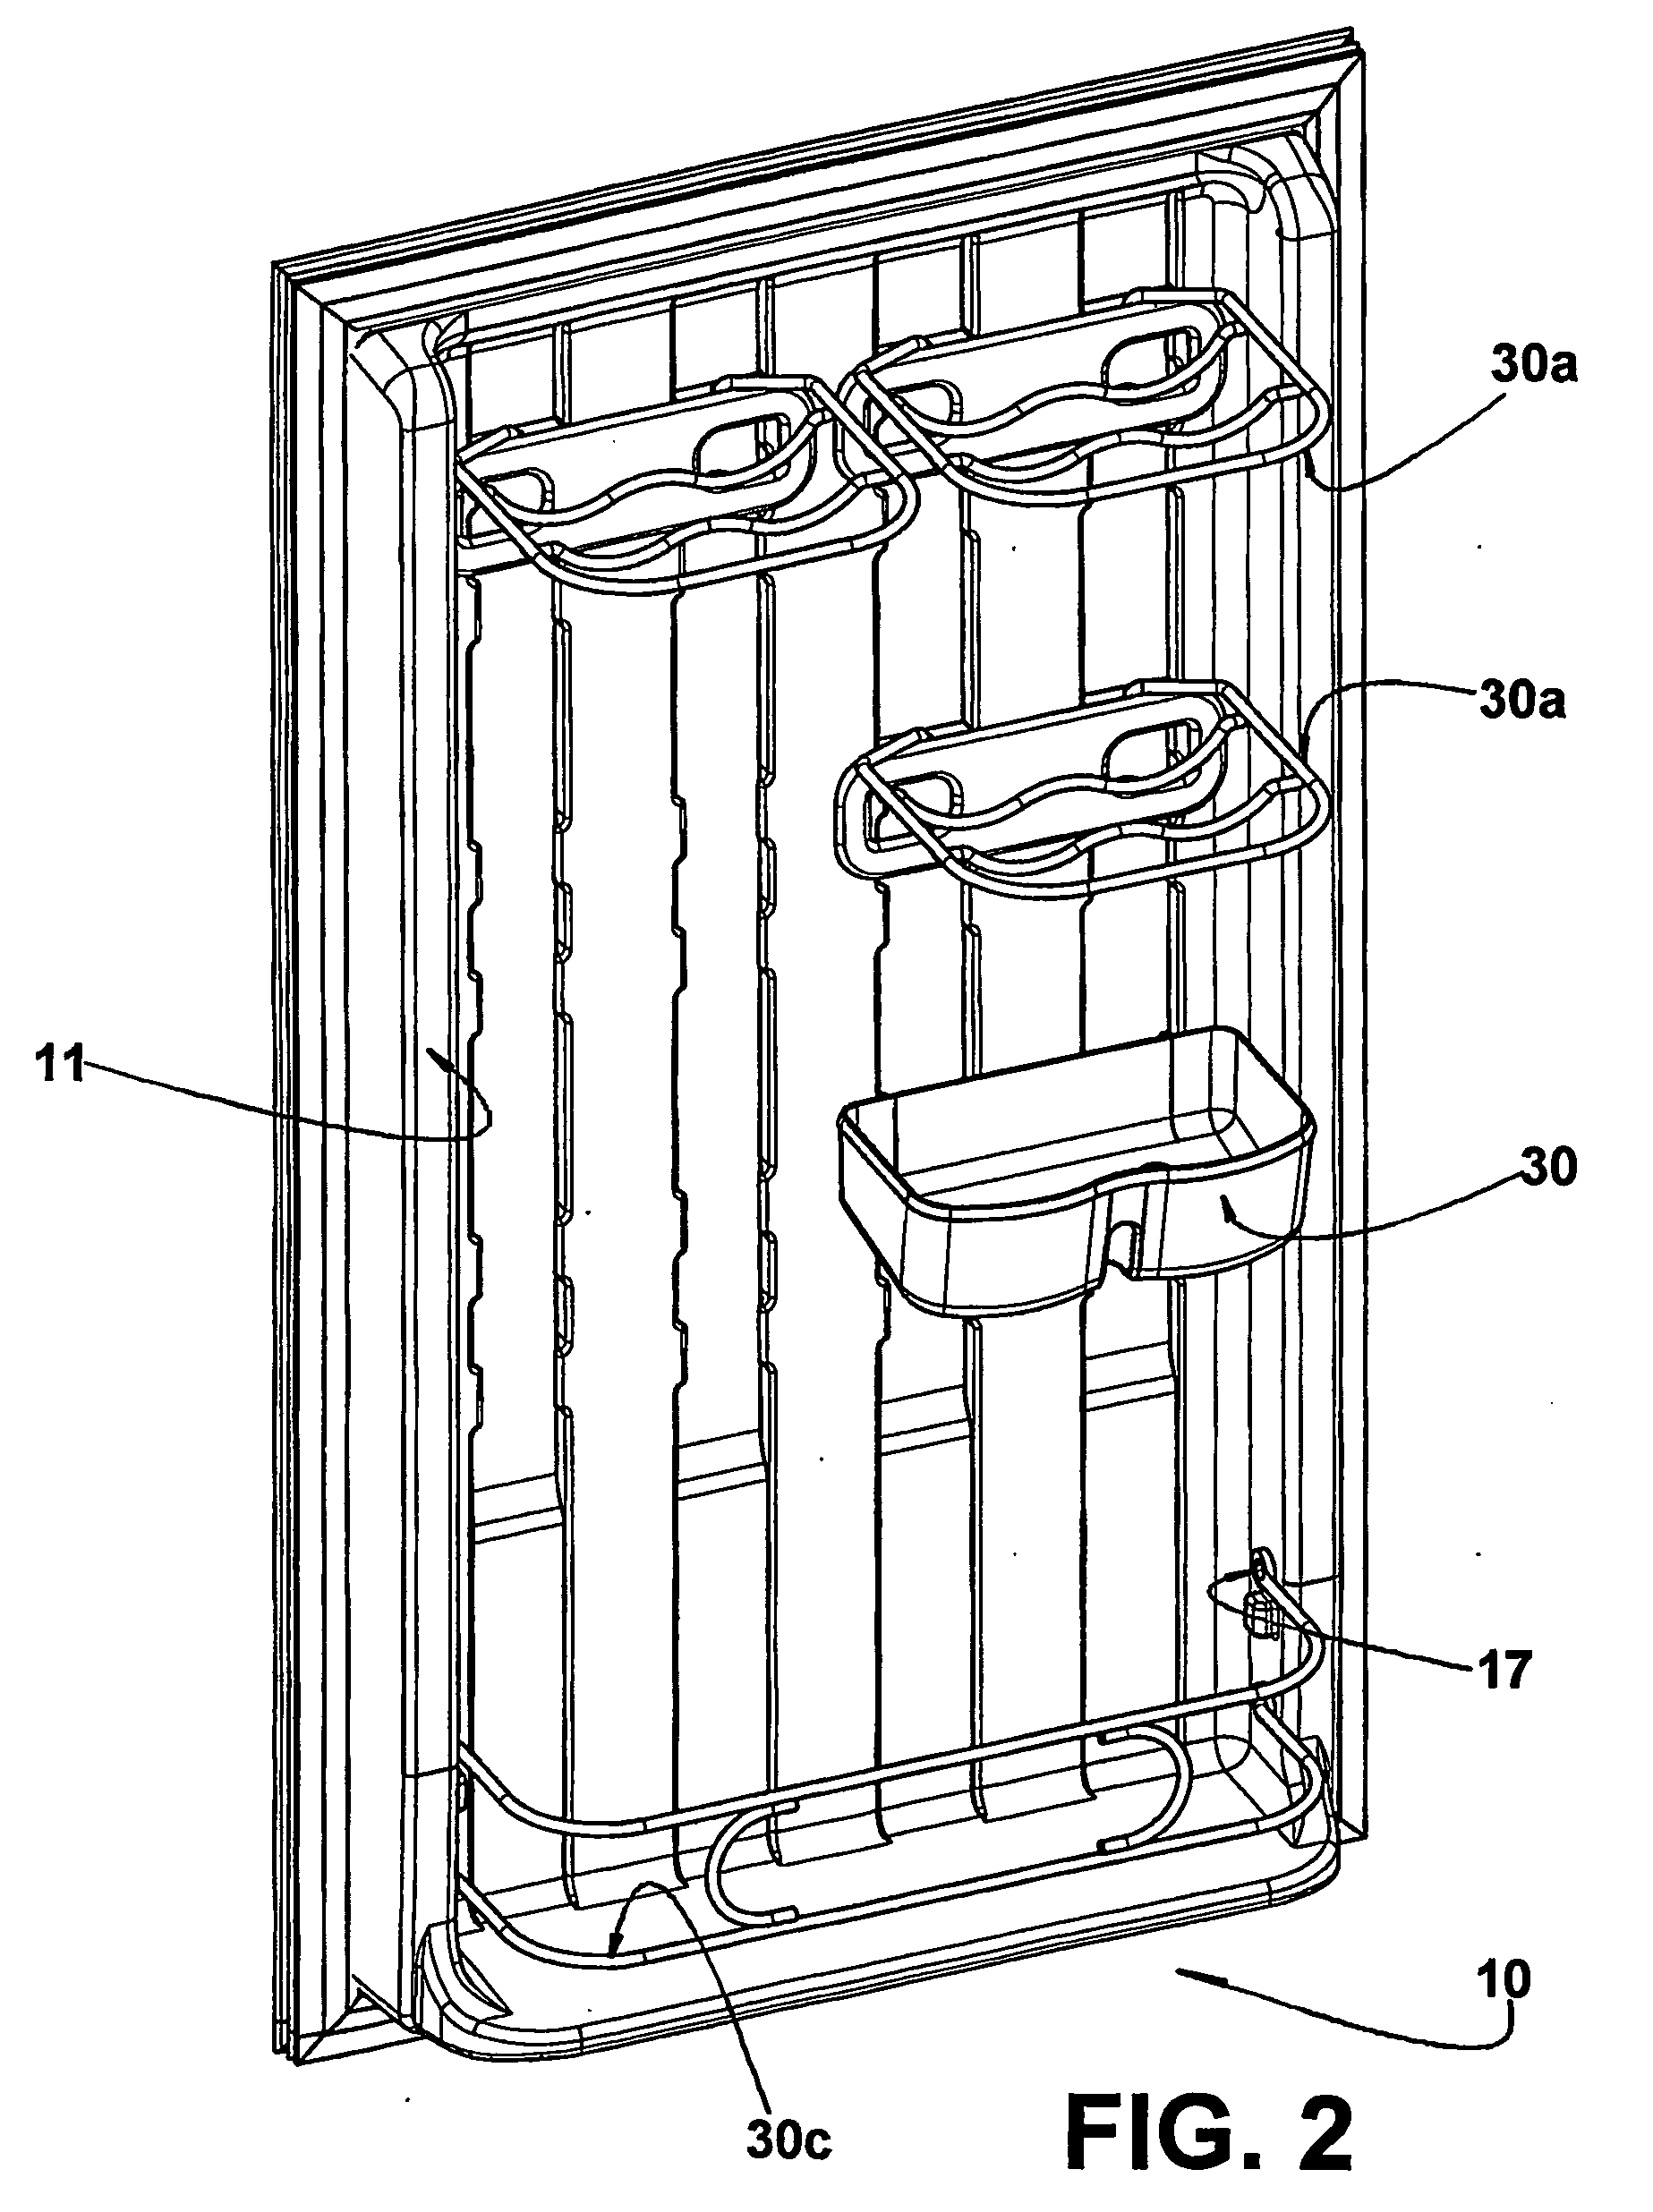 Accessory arrangement for a refrigerator door and can holder for a refrigerator